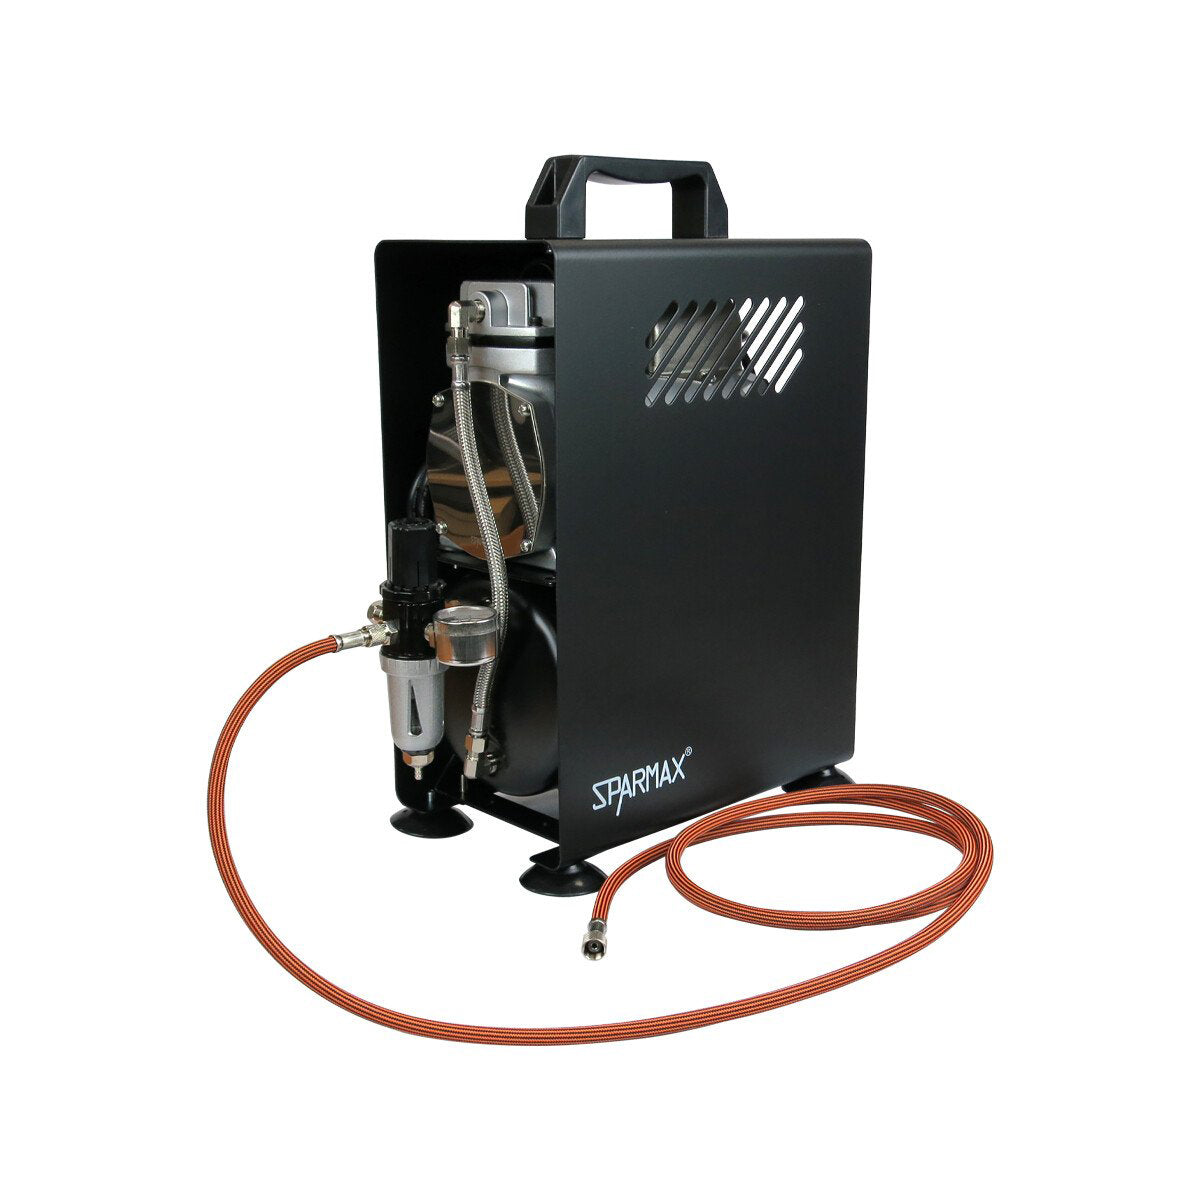 Sparmax Achieve Airbrush Compressor With 2.5L Tank